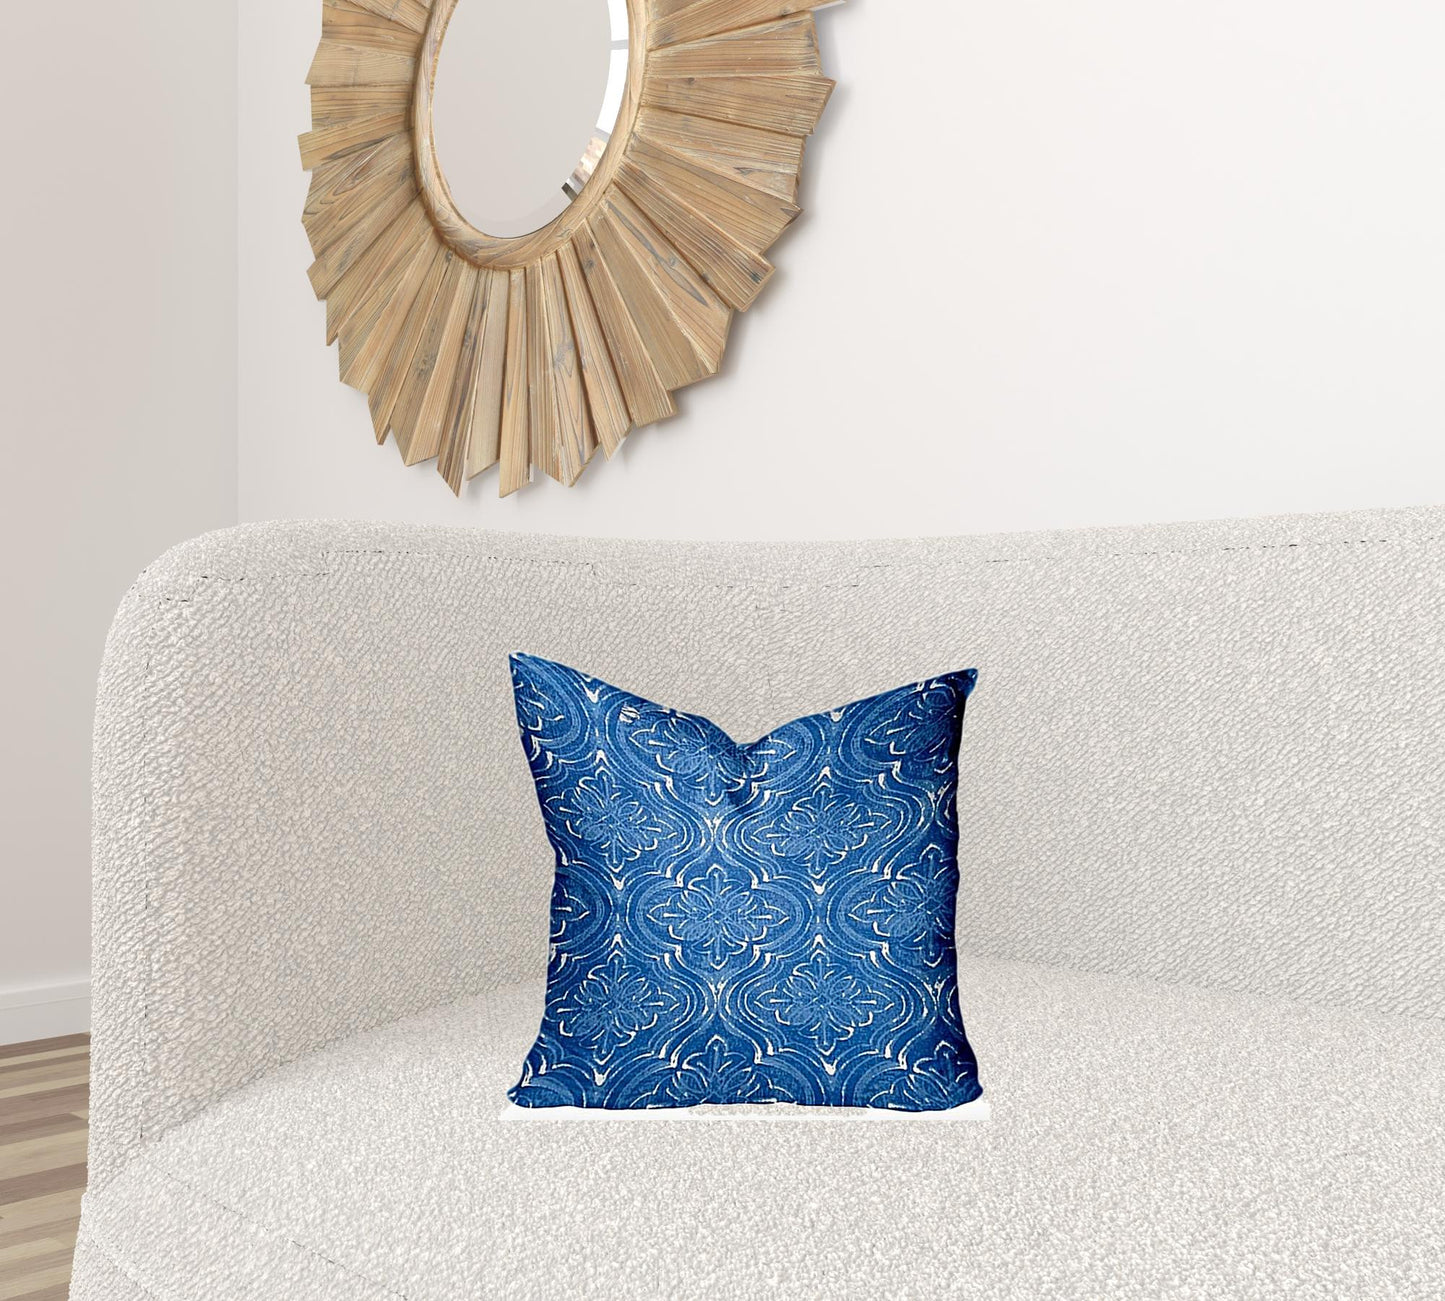 17" X 17" Blue And White Zippered Ikat Throw Indoor Outdoor Pillow